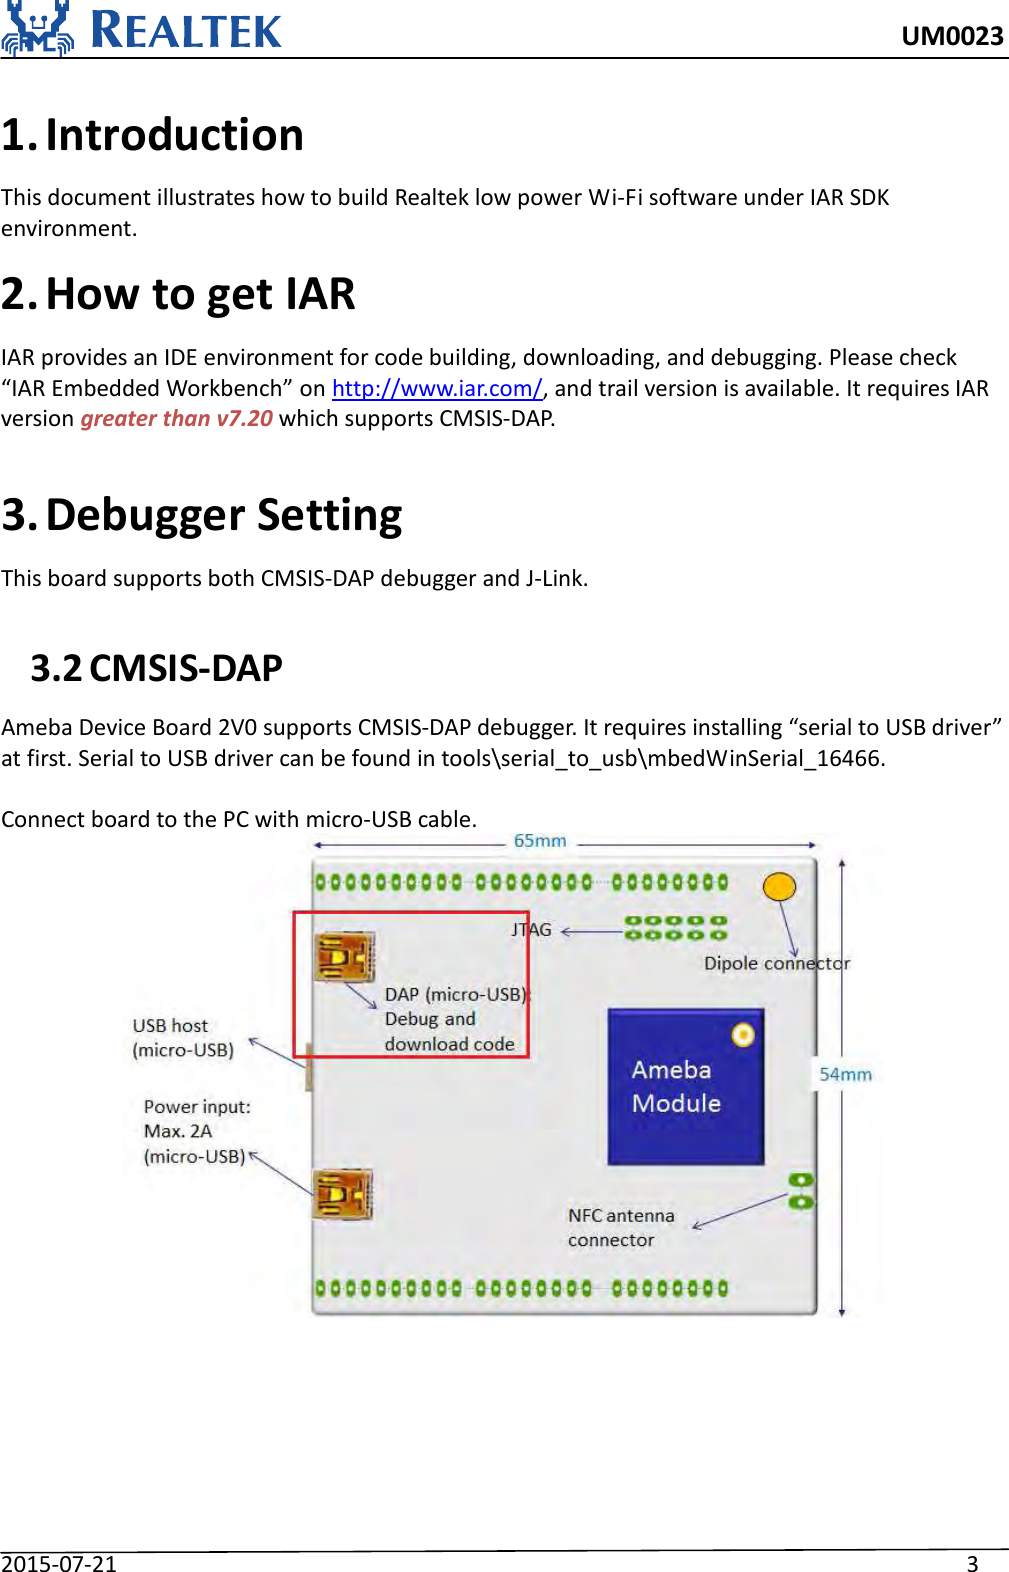     UM0023 2015-07-21                                                                    3    1. Introduction This document illustrates how to build Realtek low power Wi-Fi software under IAR SDK environment.   2. How to get IAR IAR provides an IDE environment for code building, downloading, and debugging. Please check “IAR Embedded Workbench” on http://www.iar.com/, and trail version is available. It requires IAR version greater than v7.20 which supports CMSIS-DAP.  3. Debugger Setting This board supports both CMSIS-DAP debugger and J-Link.  3.2 CMSIS-DAP Ameba Device Board 2V0 supports CMSIS-DAP debugger. It requires installing “serial to USB driver” at first. Serial to USB driver can be found in tools\serial_to_usb\mbedWinSerial_16466.    Connect board to the PC with micro-USB cable.    